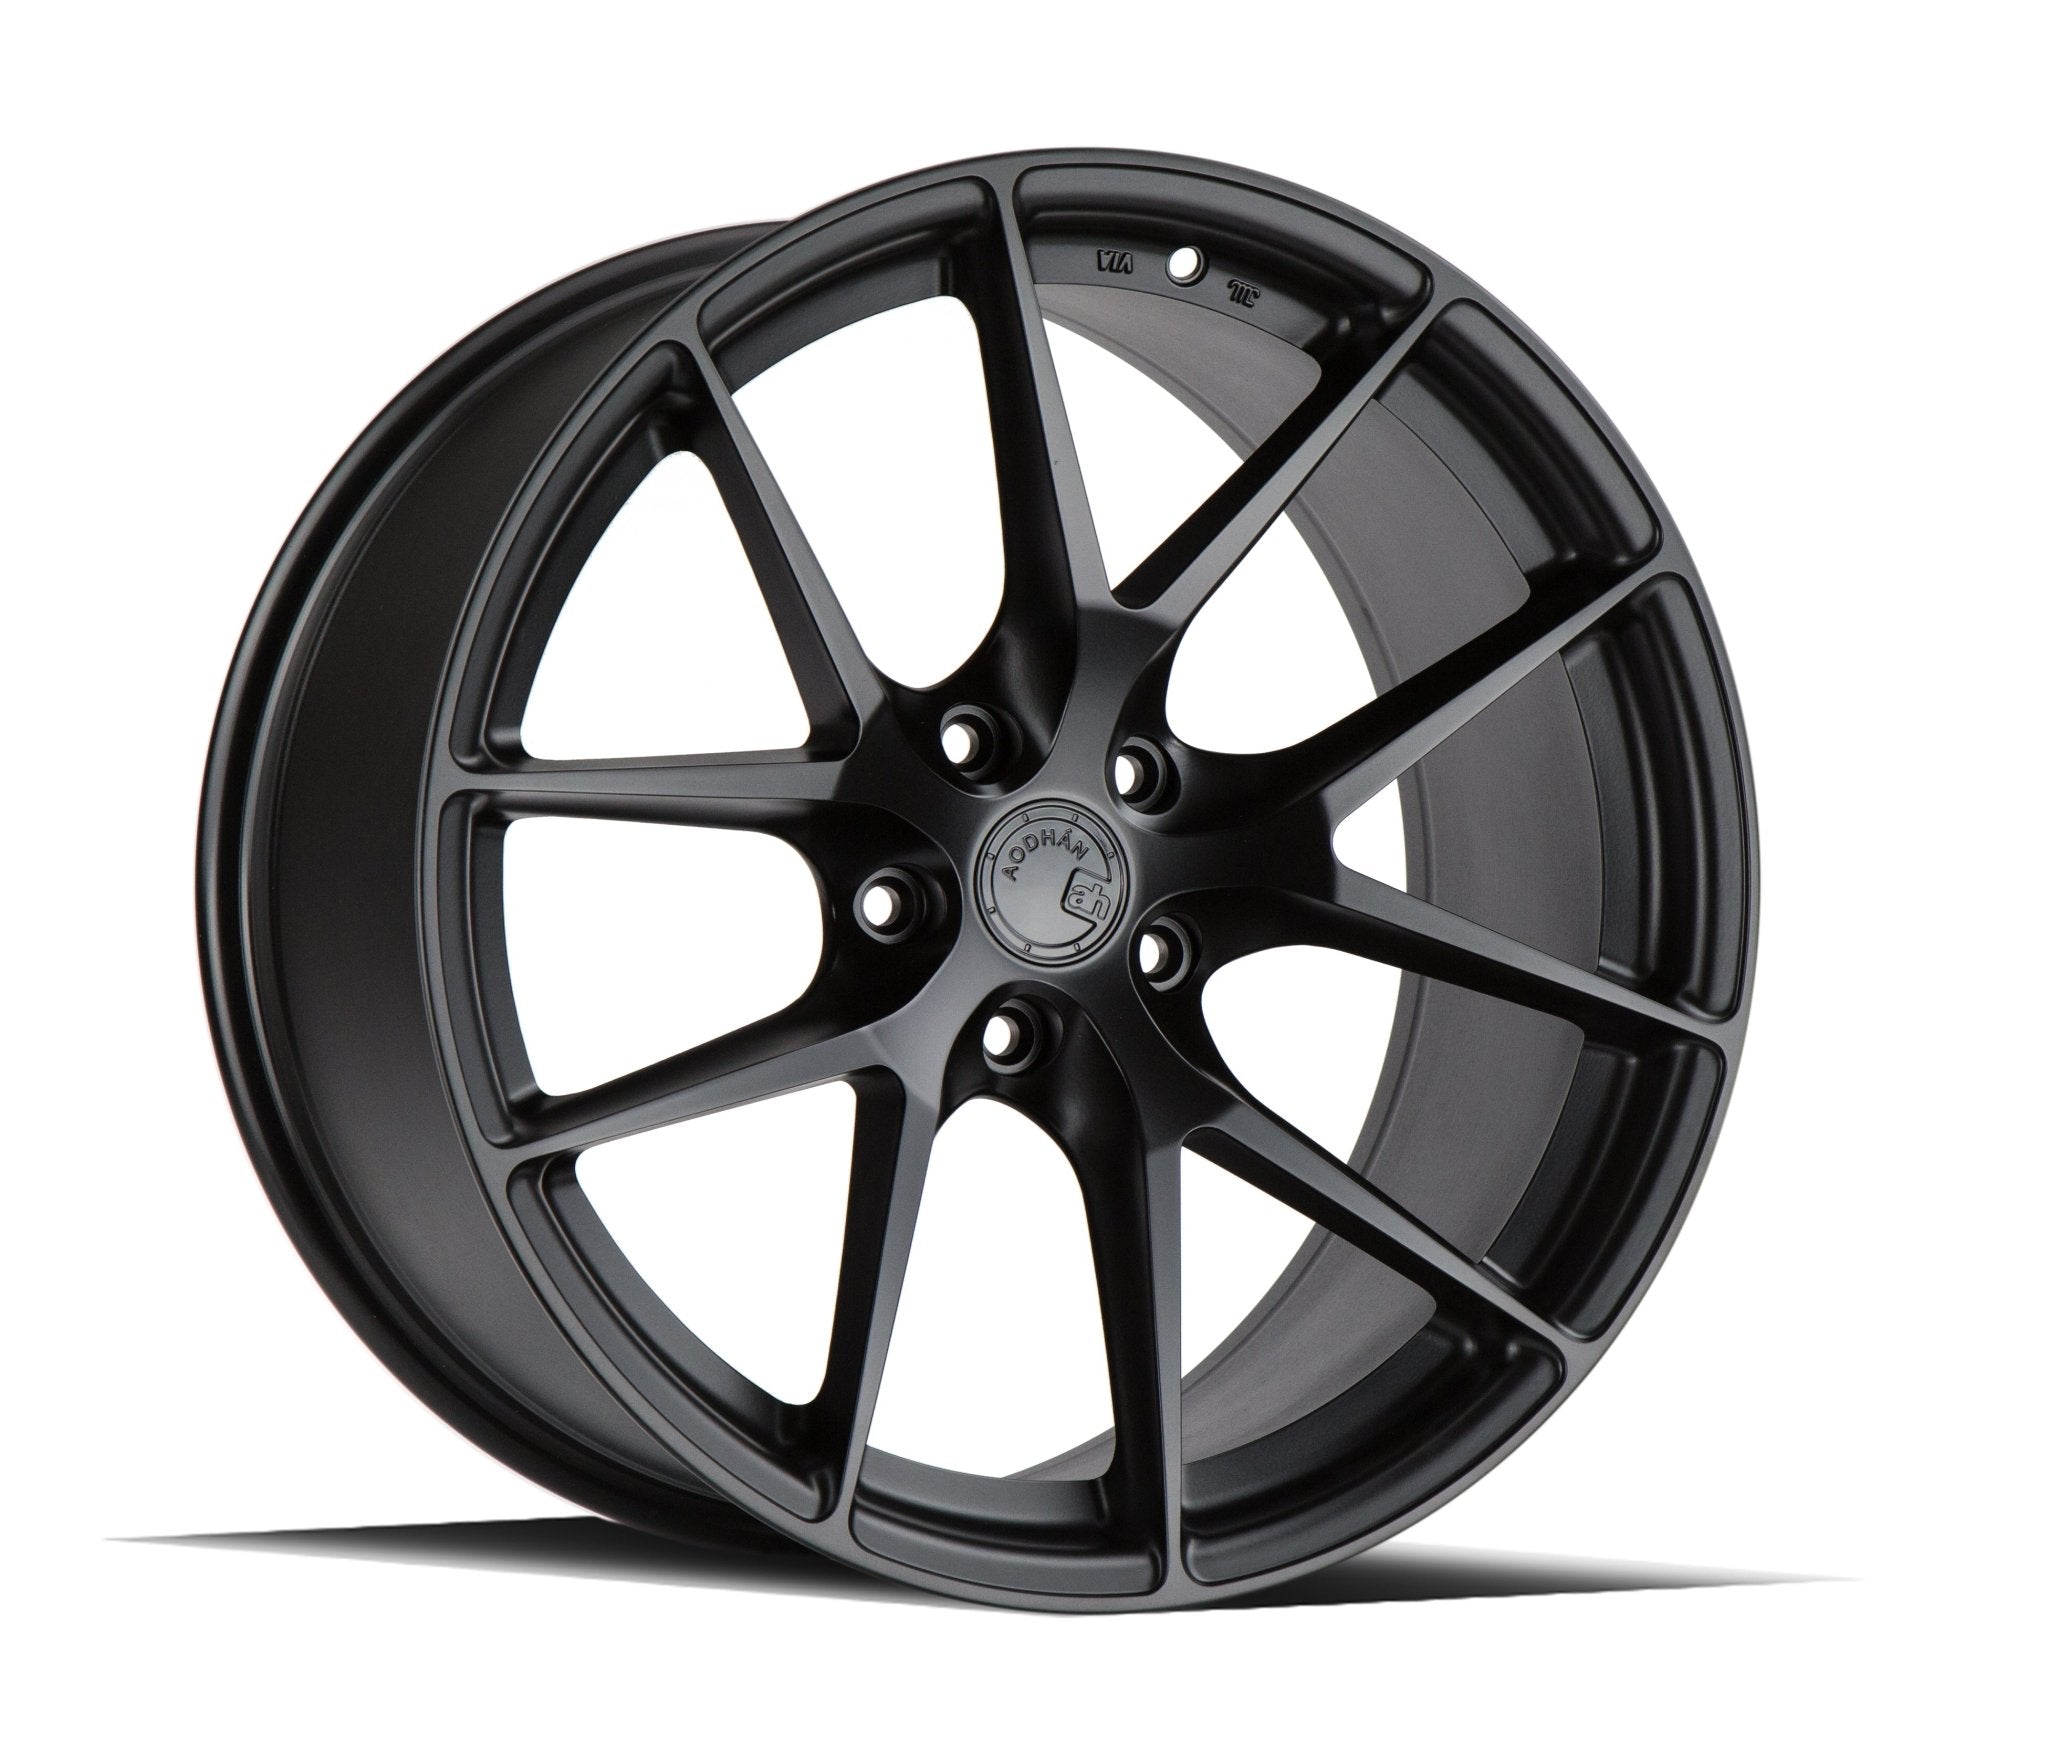 AodHan AFF Series AFF7 19x9.5 5x114.3 +35 Matte Black Wheel - Dirty Racing Products